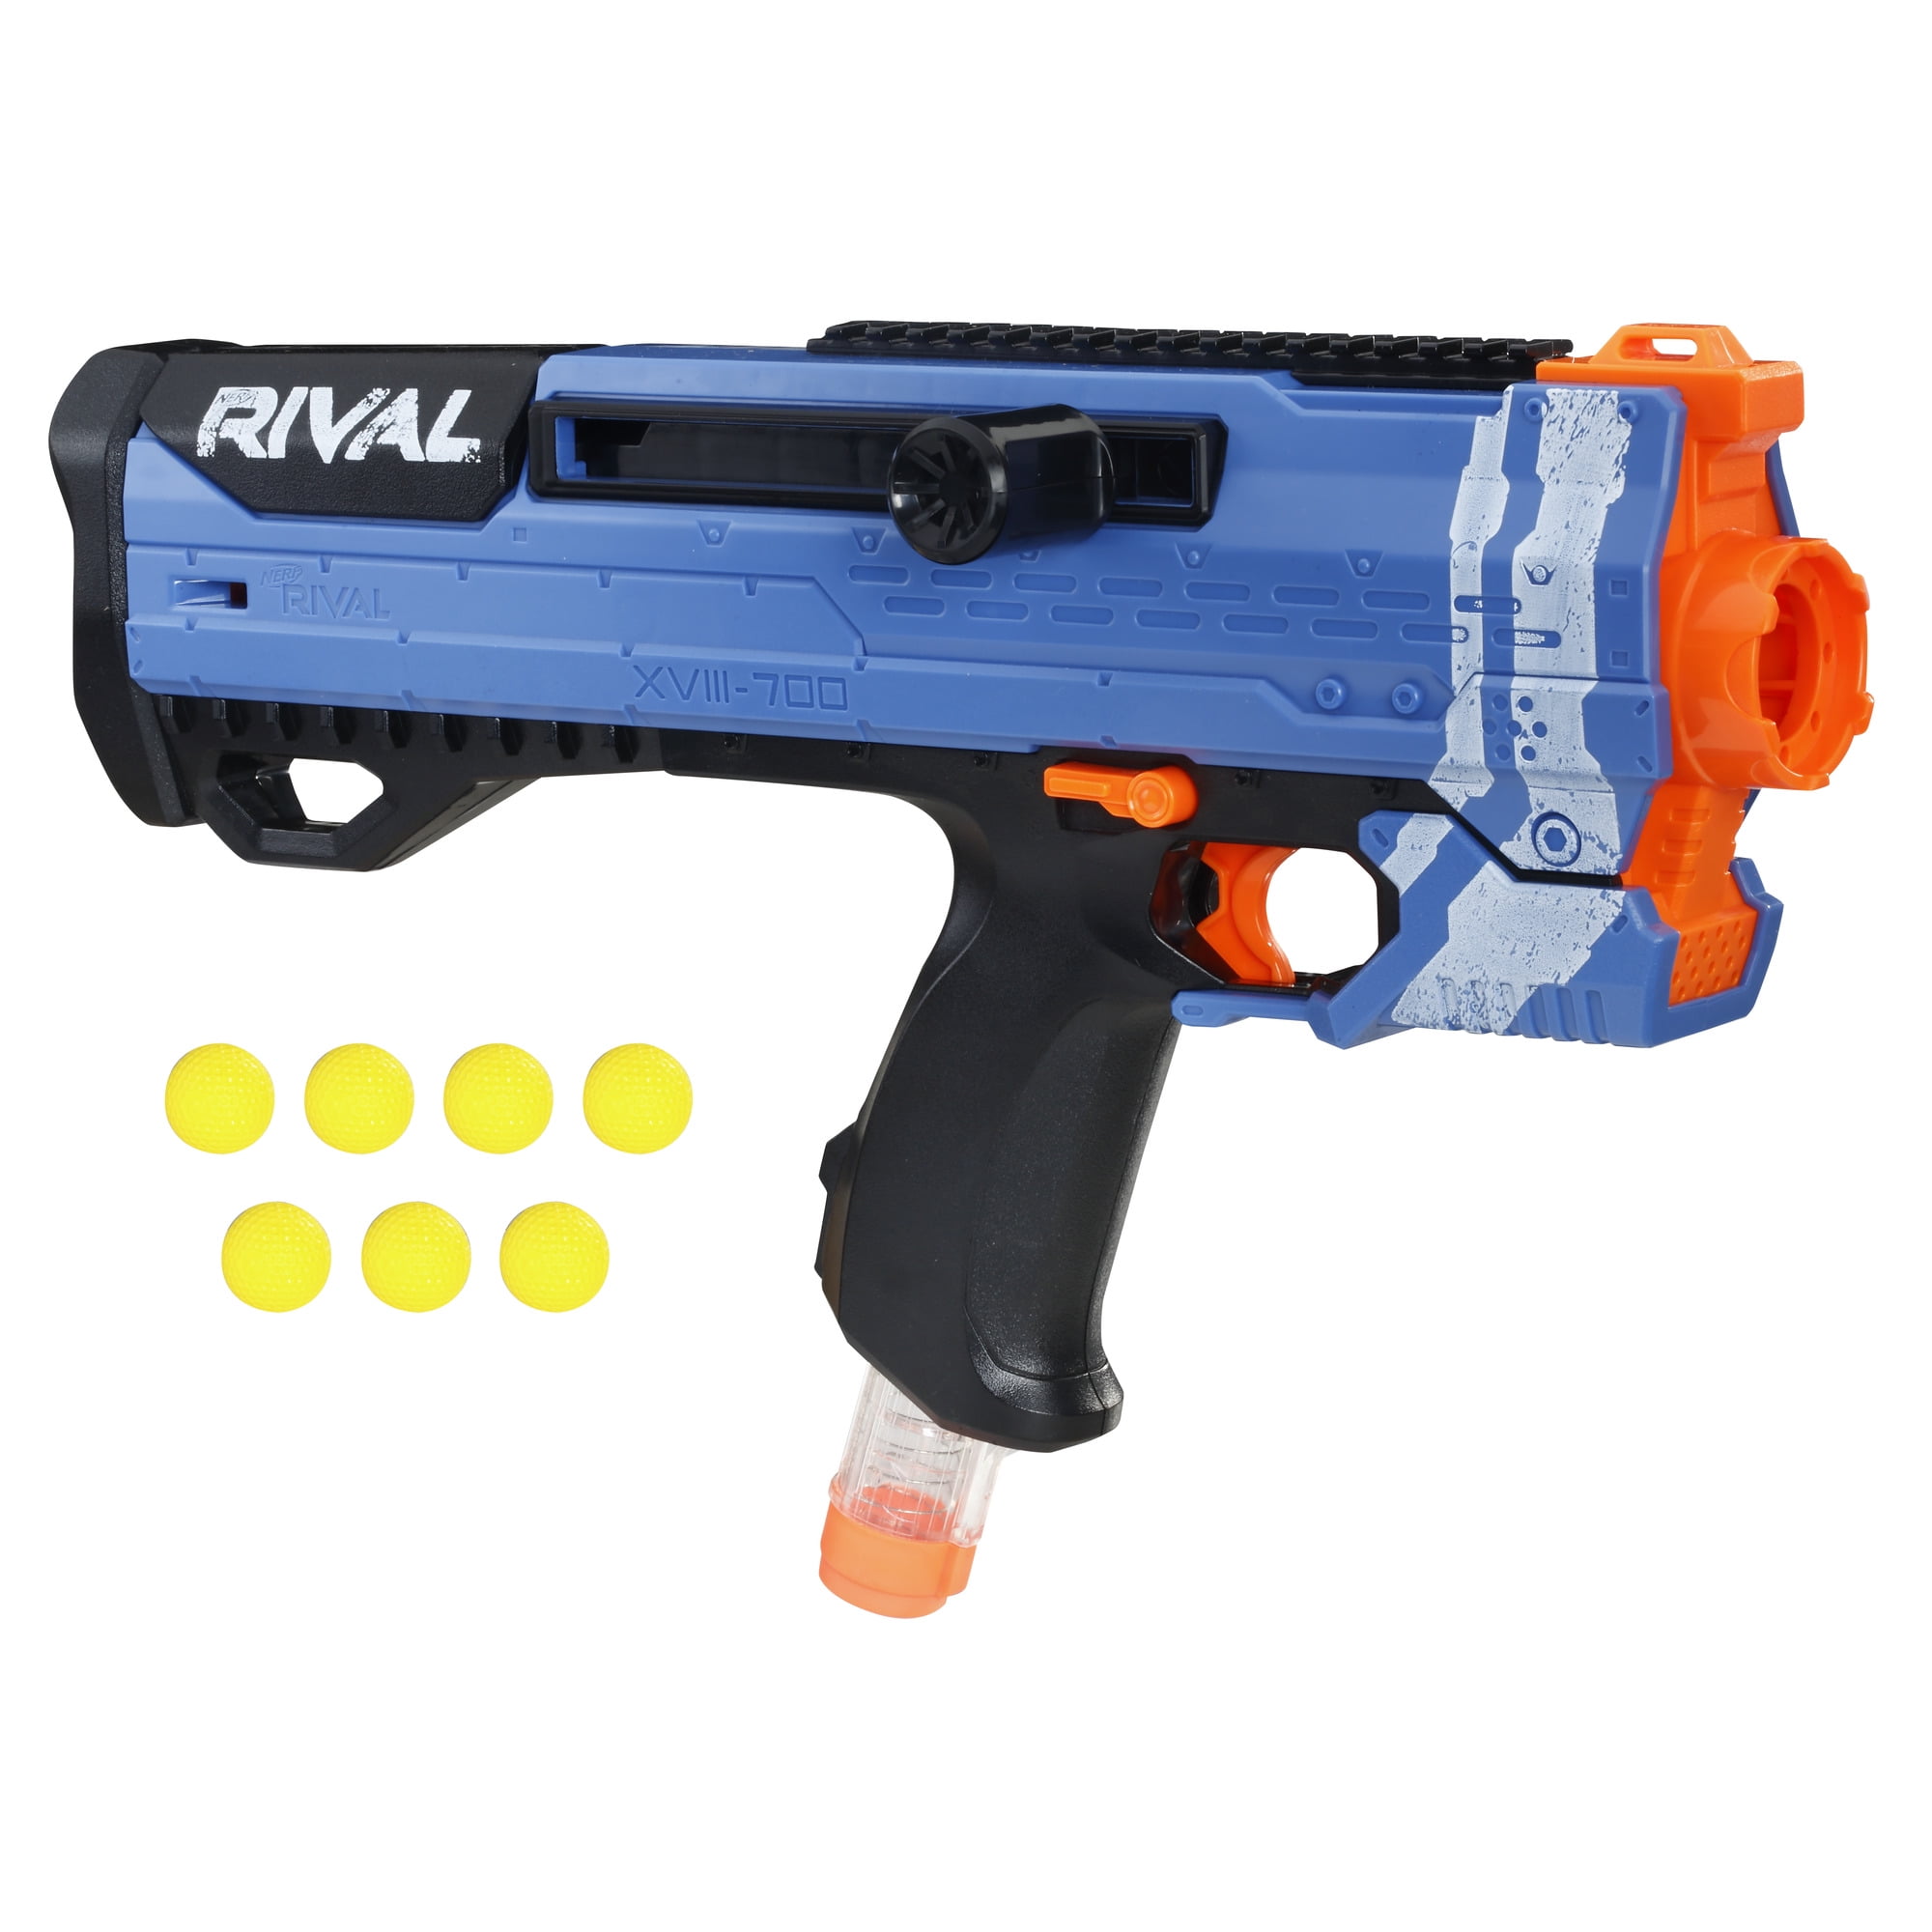 NERF Rival 12-round Magazine Standard B1594 630509327492 for sale online 